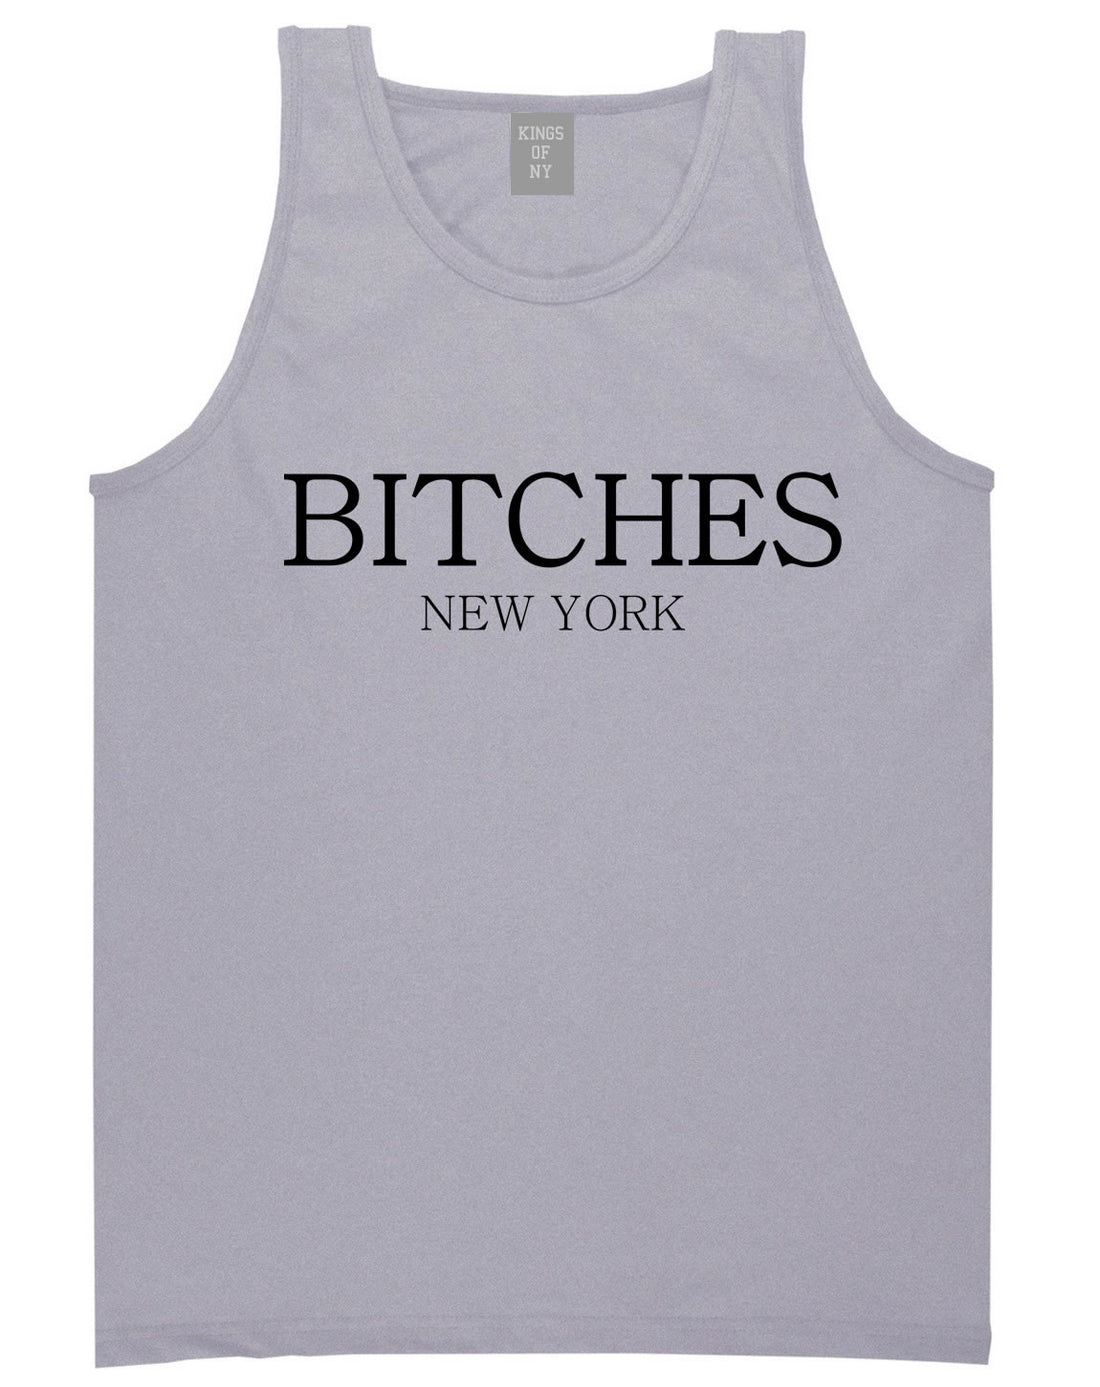  Bitches New York Tank Top in Grey by Kings Of NY